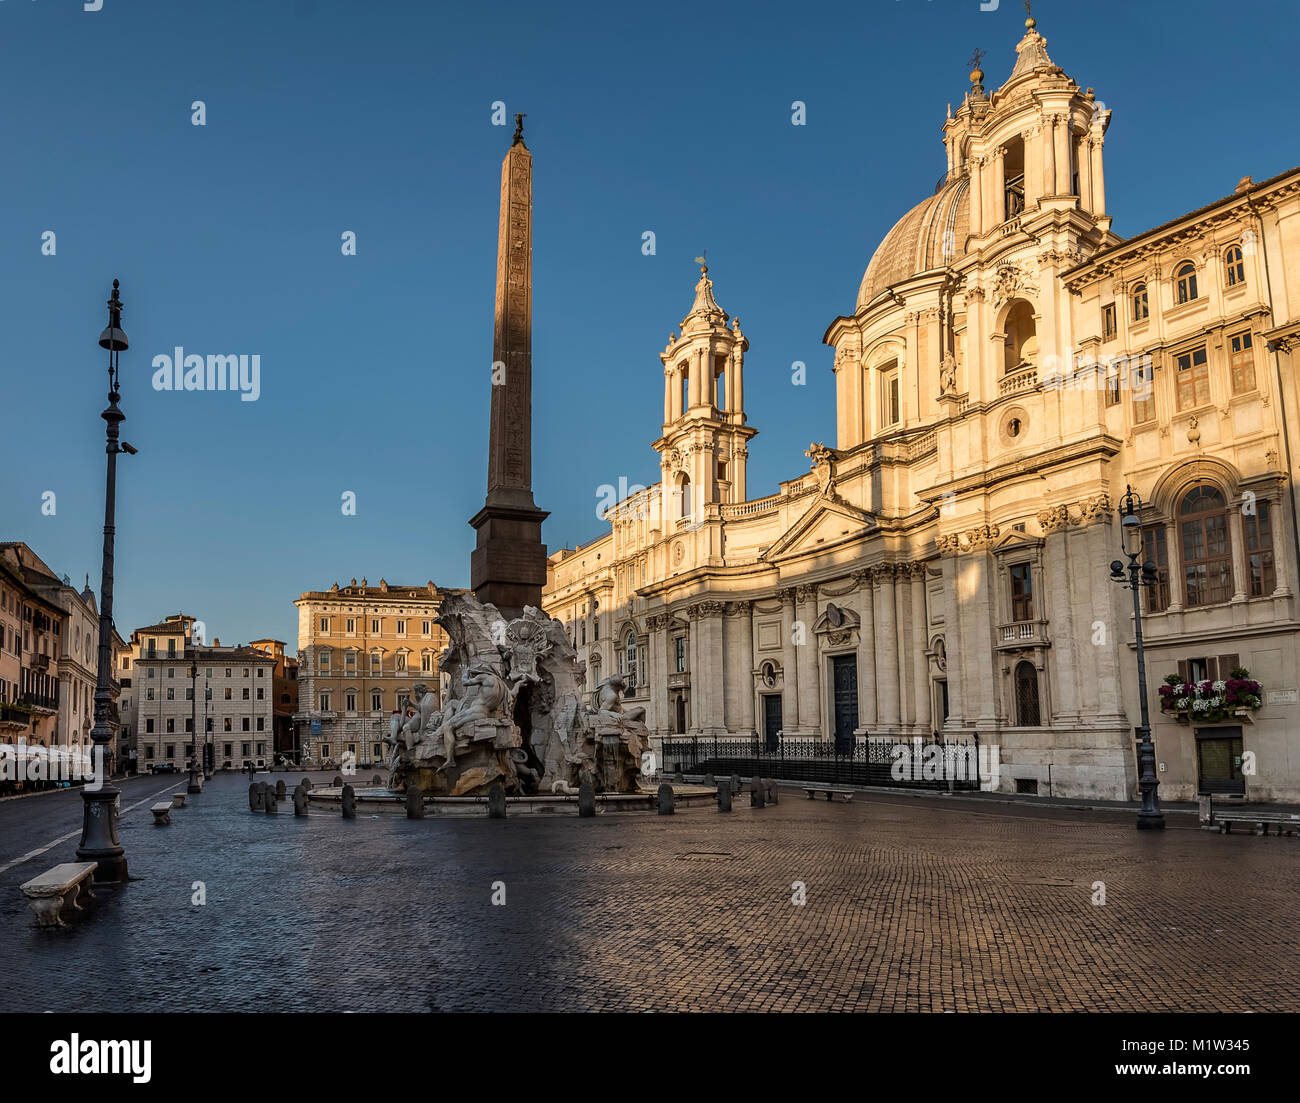 Piazza Navona is one of the largest and most beautiful piazza squares ...